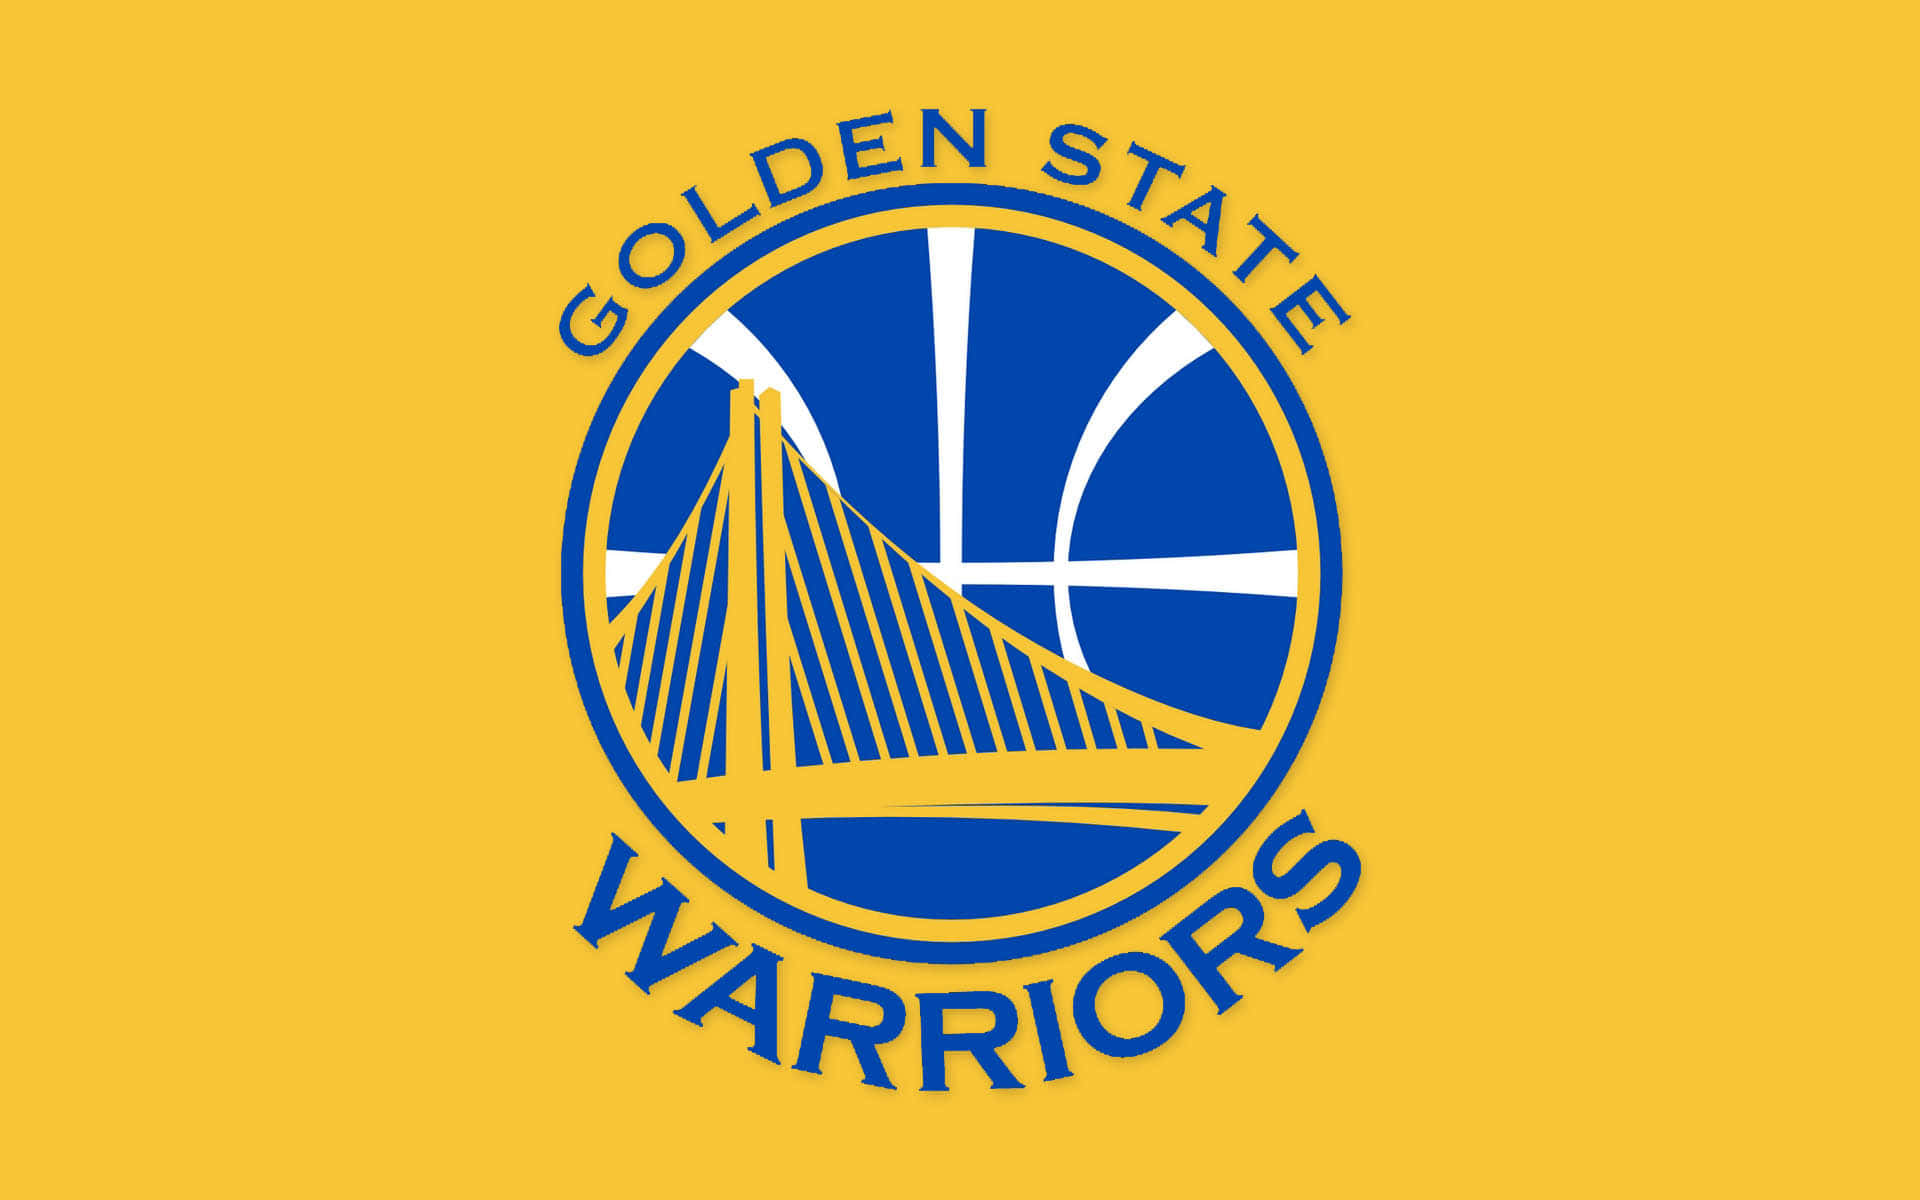 Golden State Warriors logo against a background of team colors Wallpaper